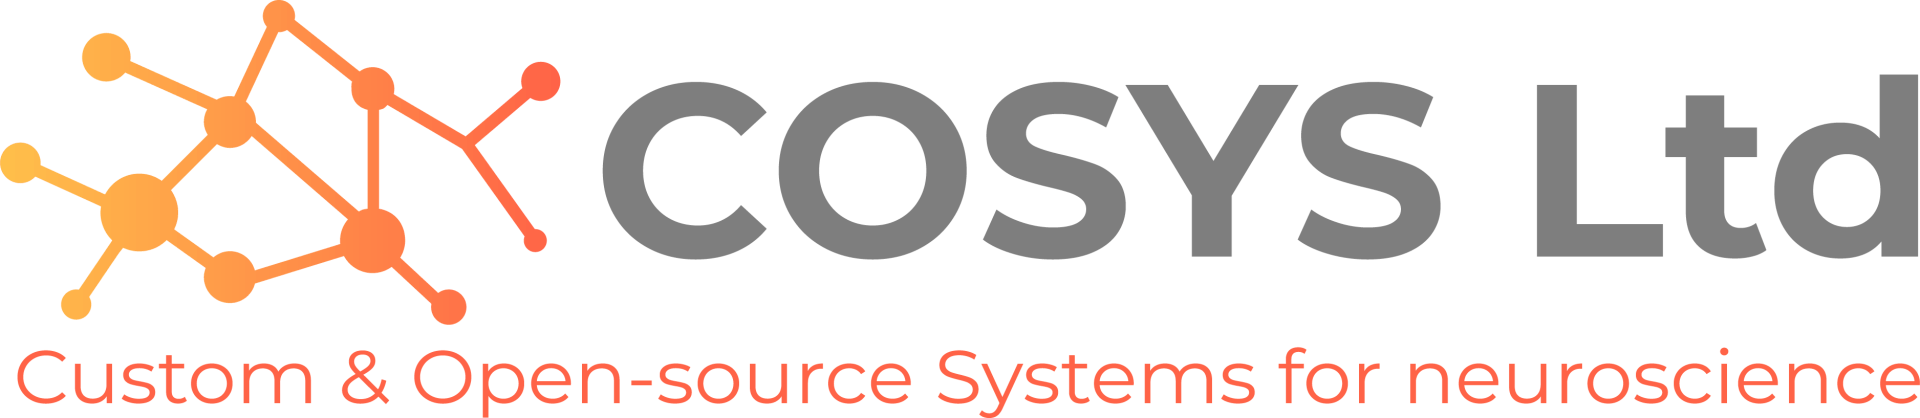 Cosys - Custom & Open-source Systems for neuroscience.